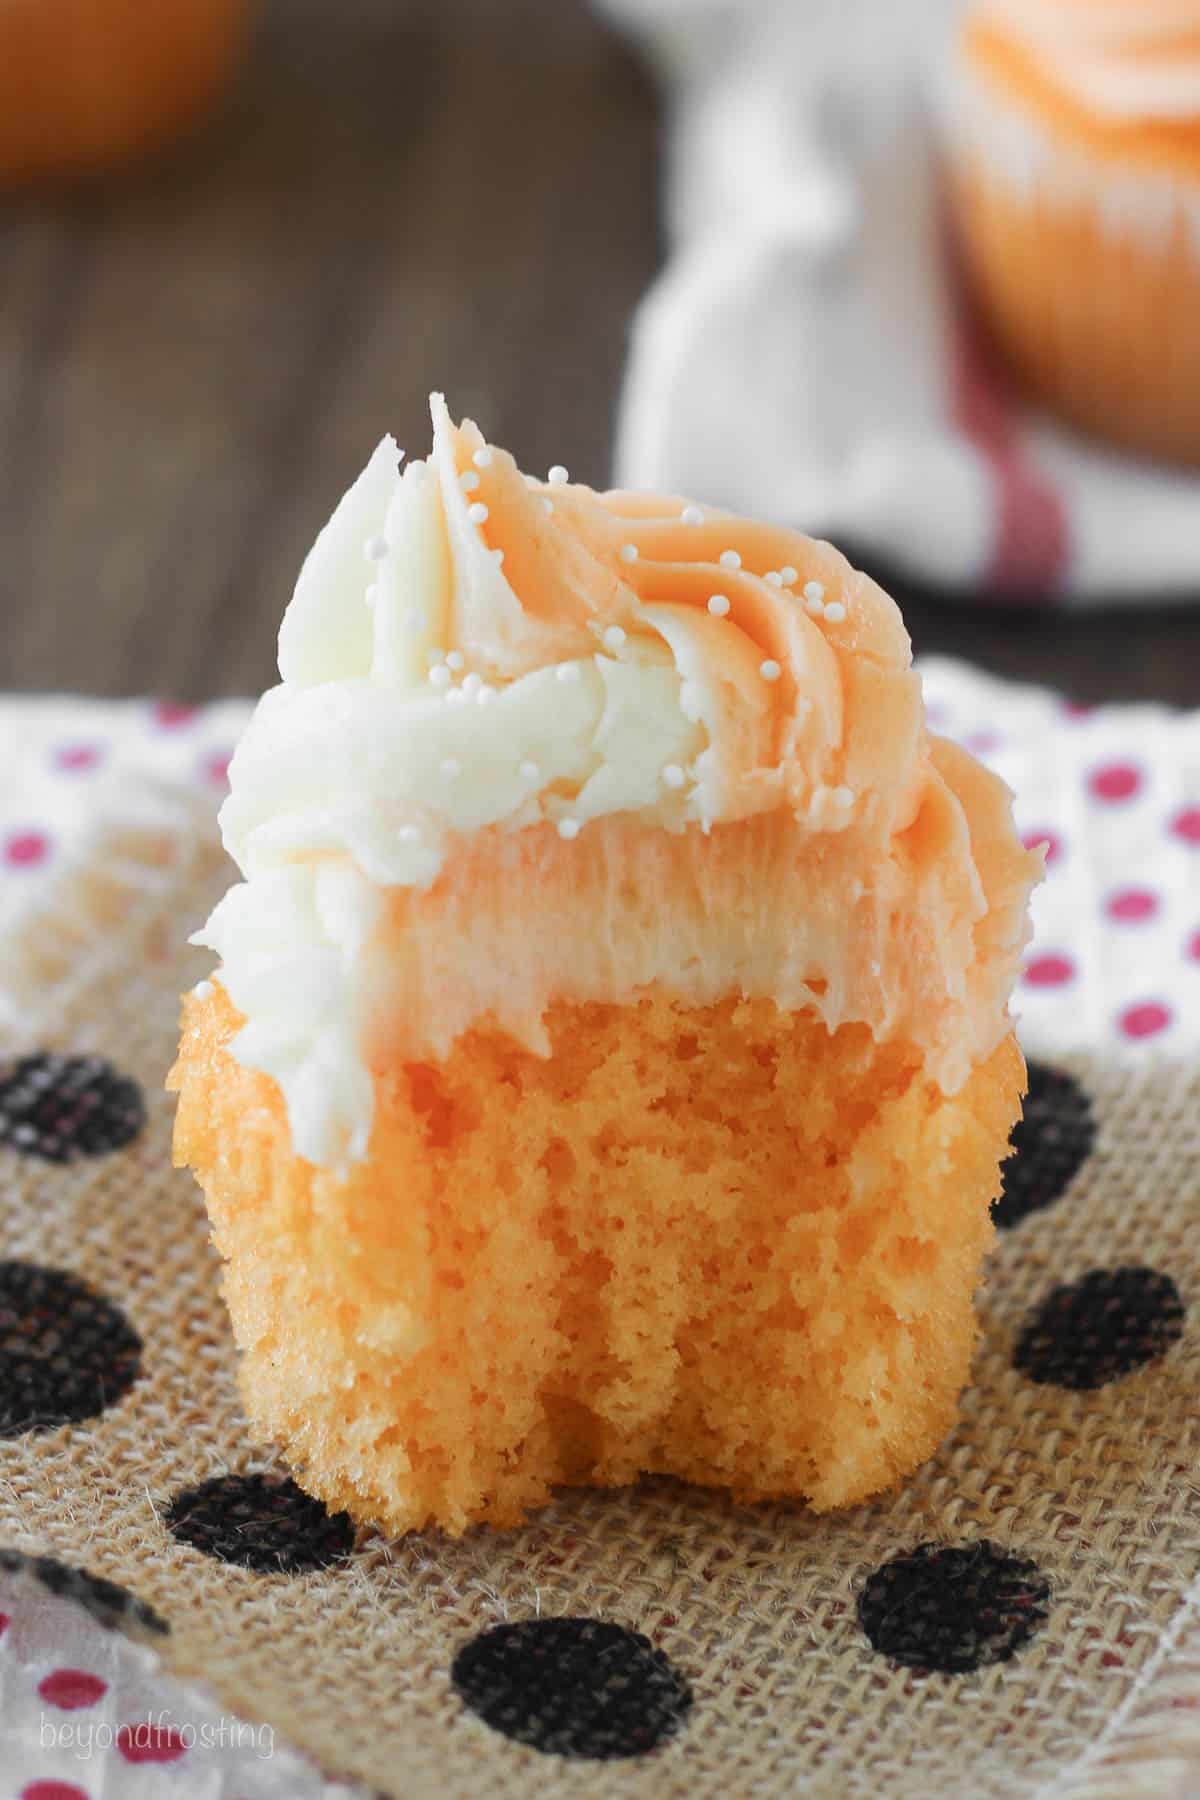 side view of an orange cream cupcake with a bite taken out